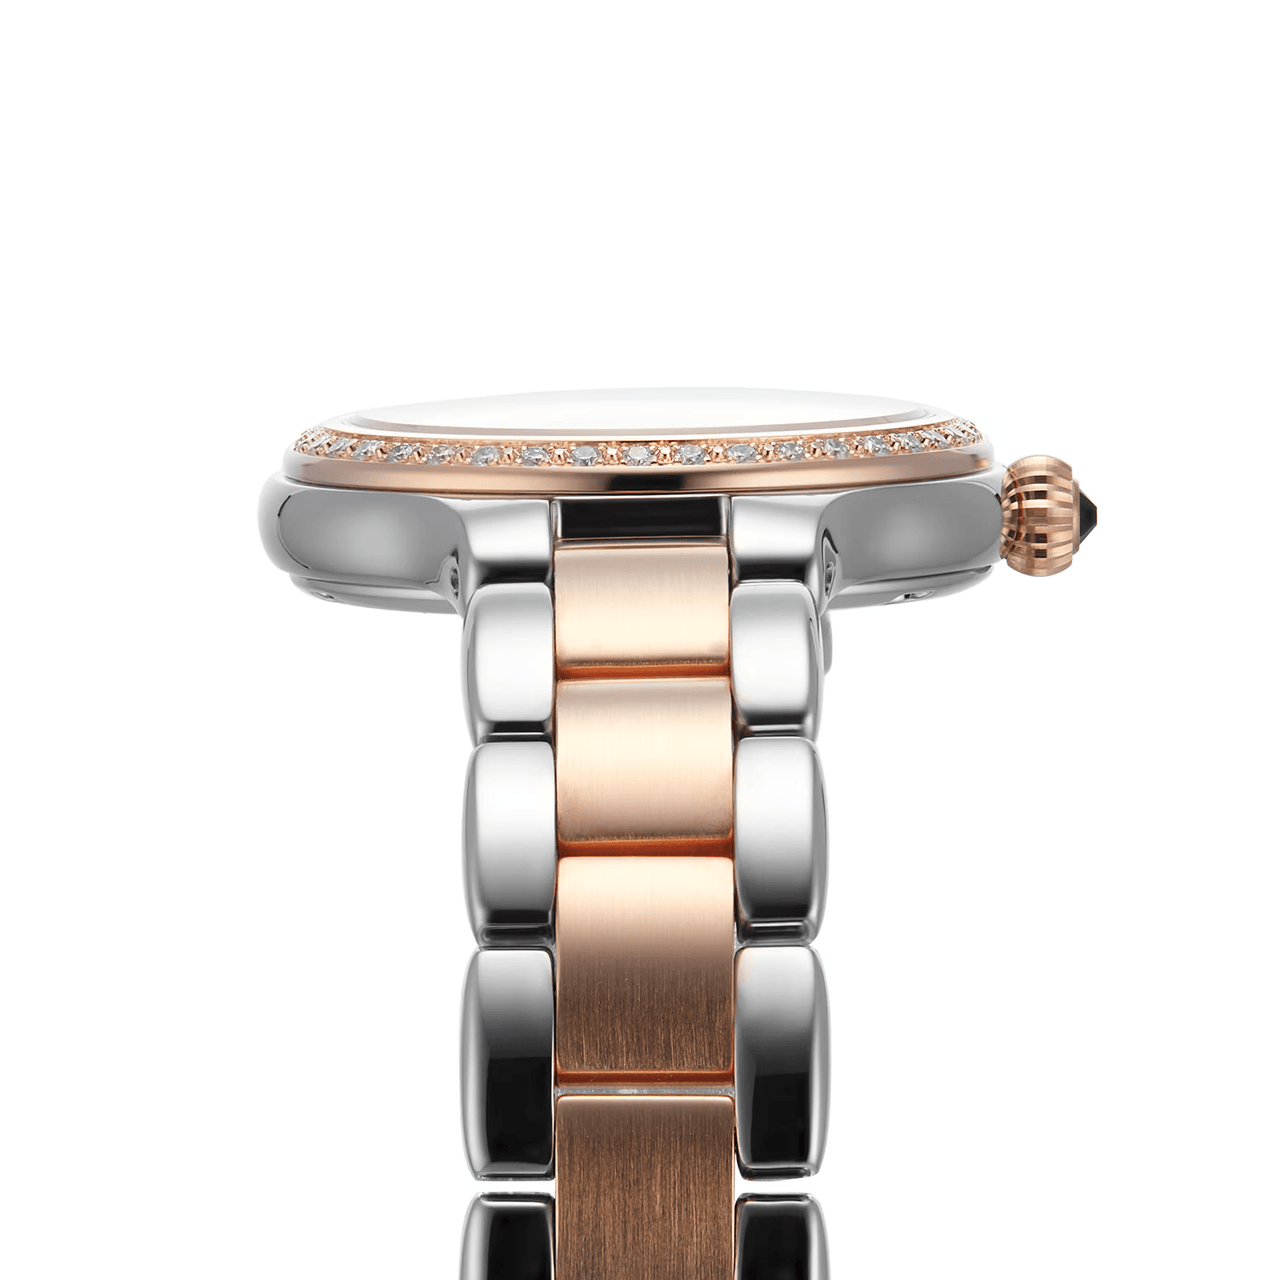 Frederique Constant Ladies Watch Classic Delight Two-Tone Rose Gold FC-200WHD1ERD32B